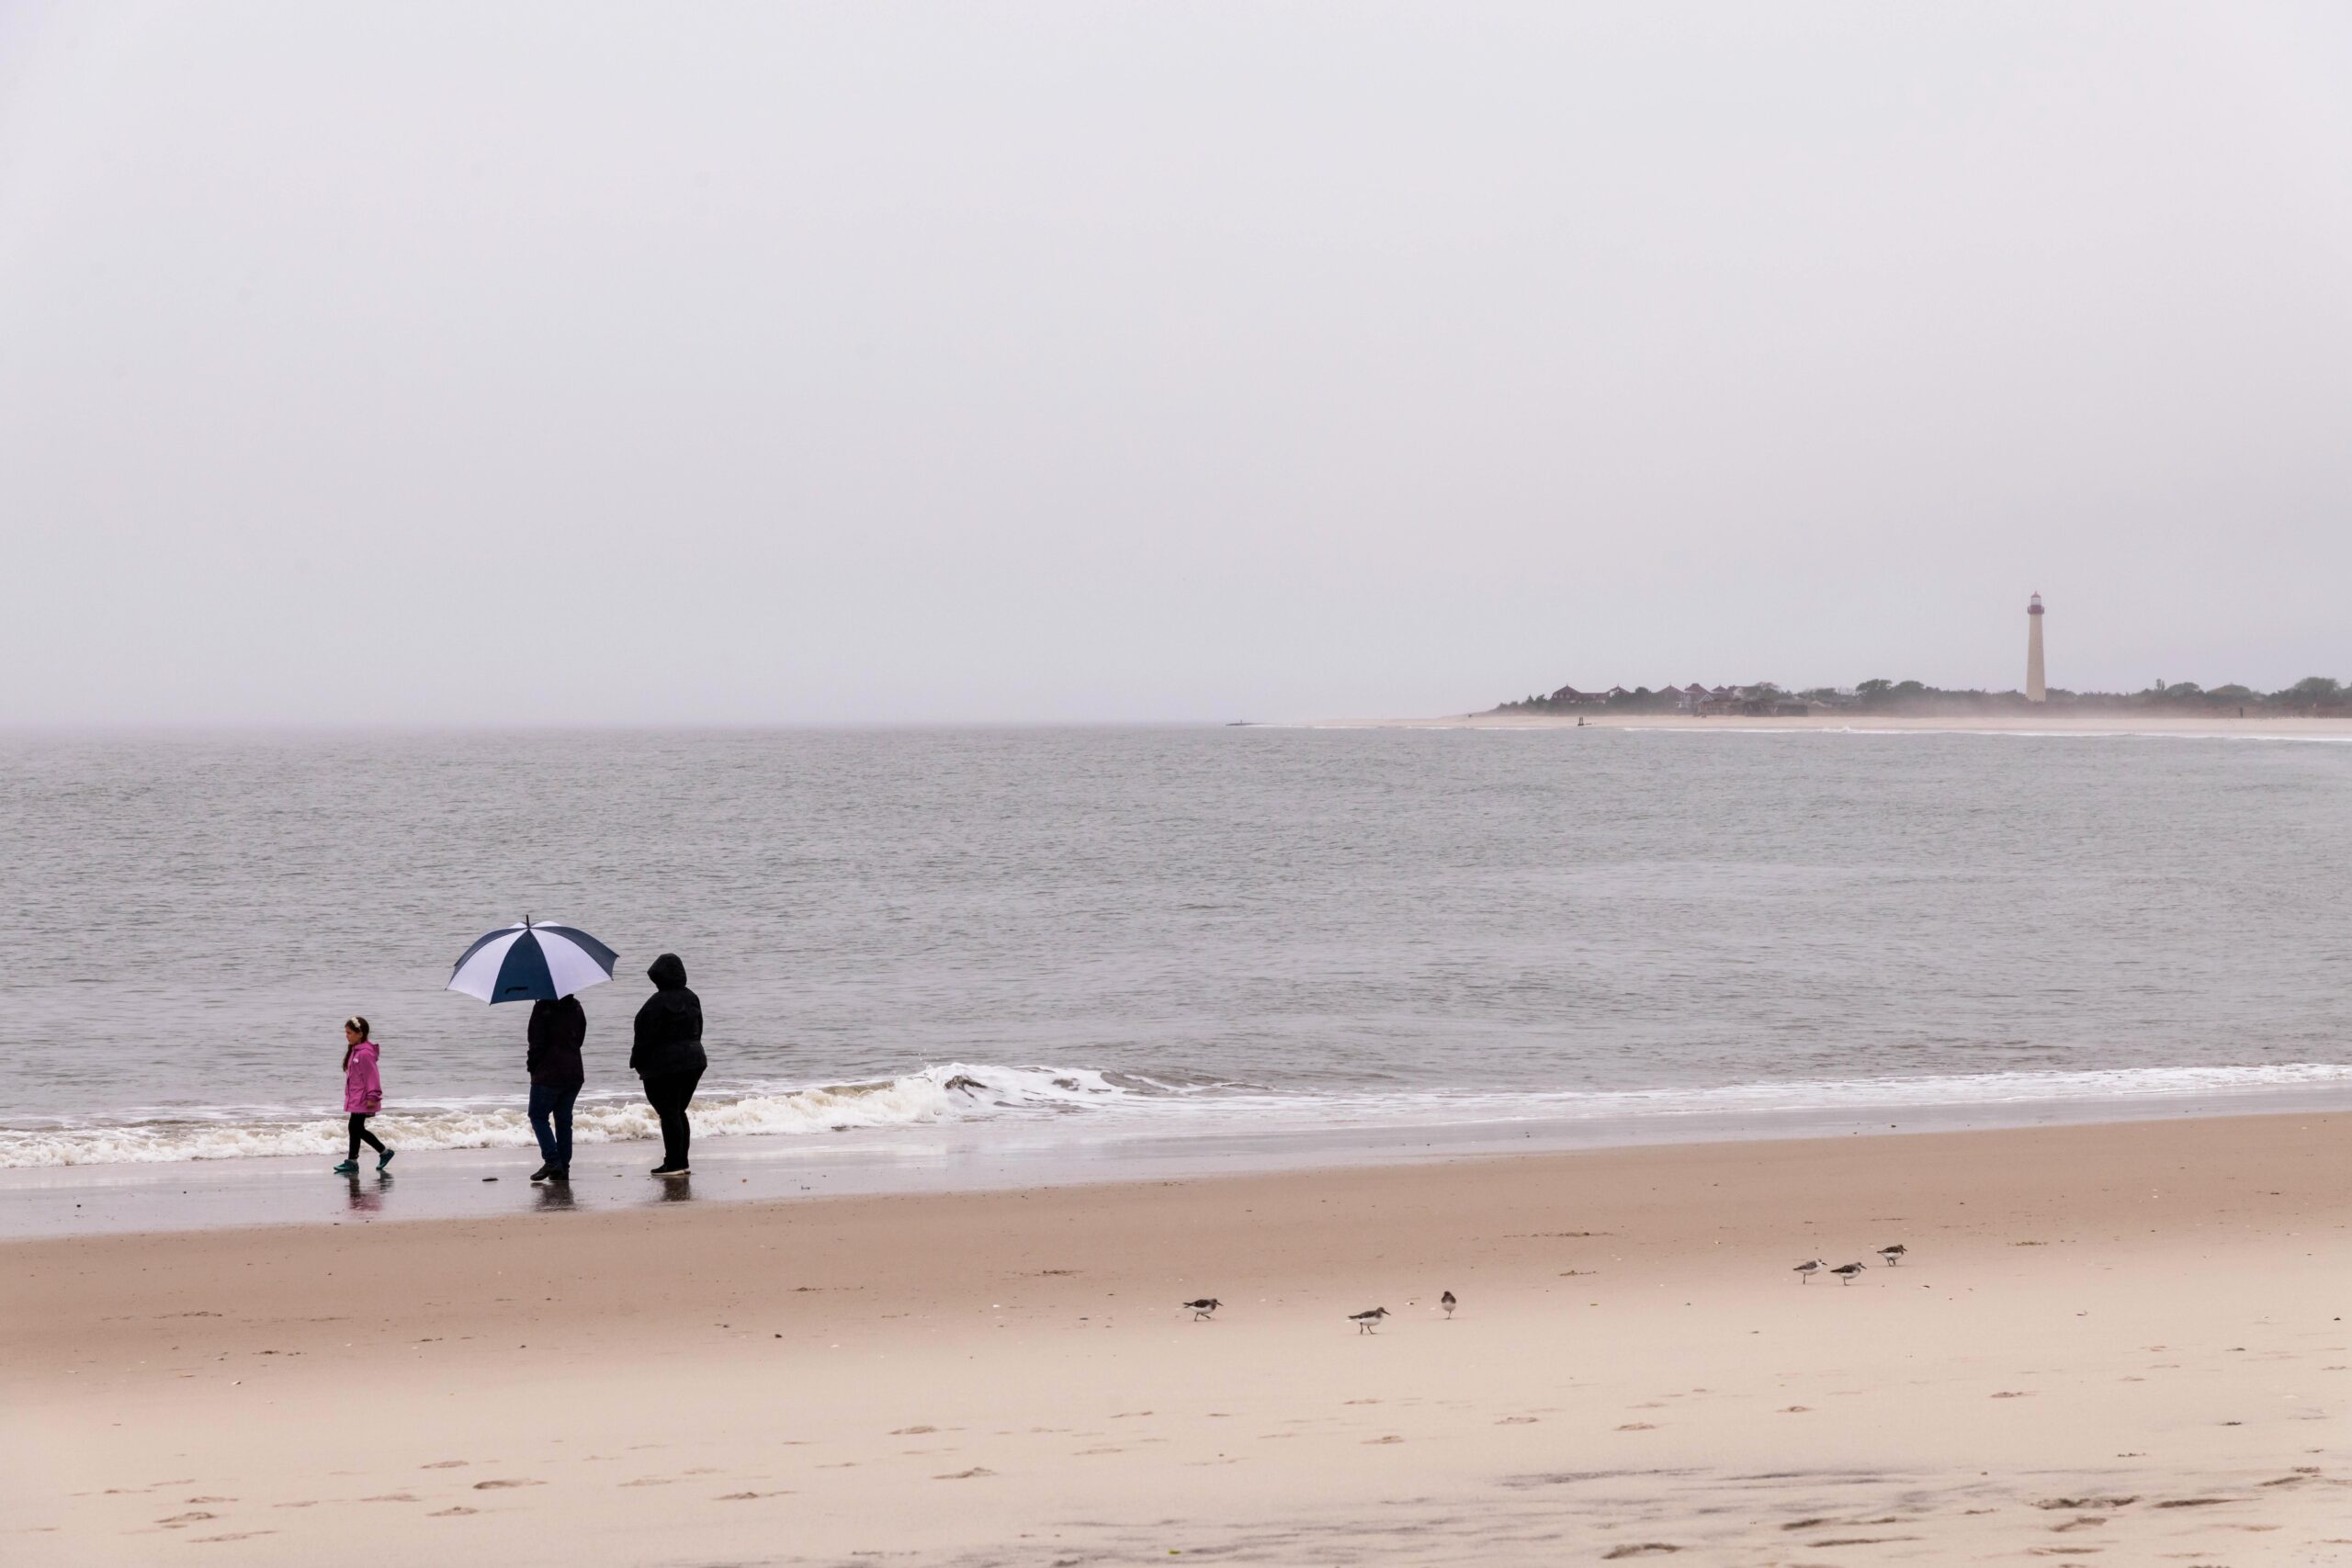 Two adults carrying an umbrella and a child walking on the beach with a cloudy gray sky and the Cape May Lighthouse in the distance